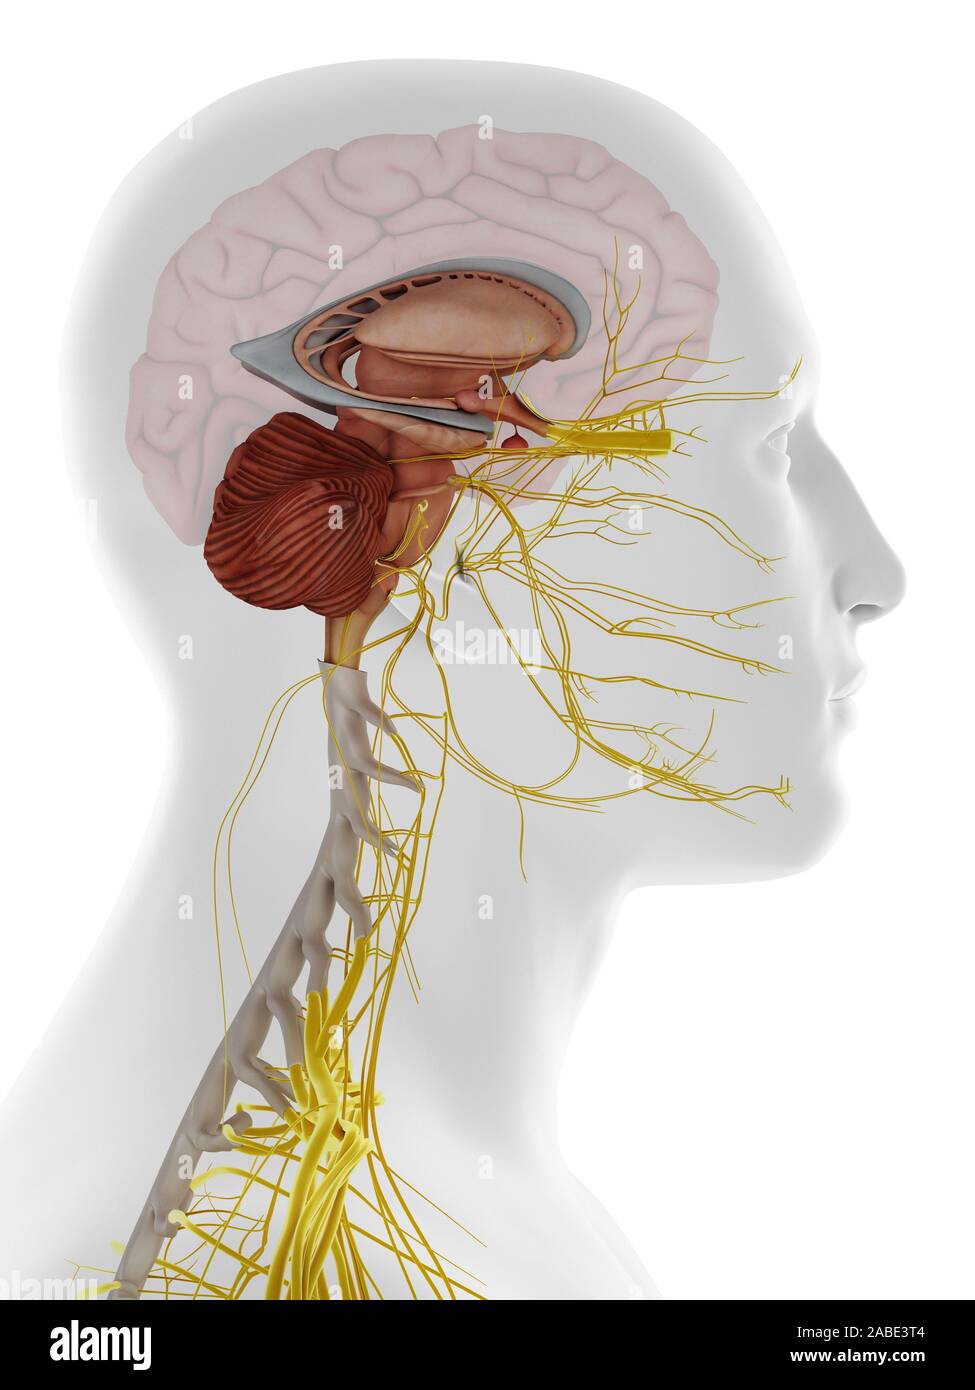 3d rendered medically accurate illustration of a lateral view of the inside brain anatomy Stock Photo